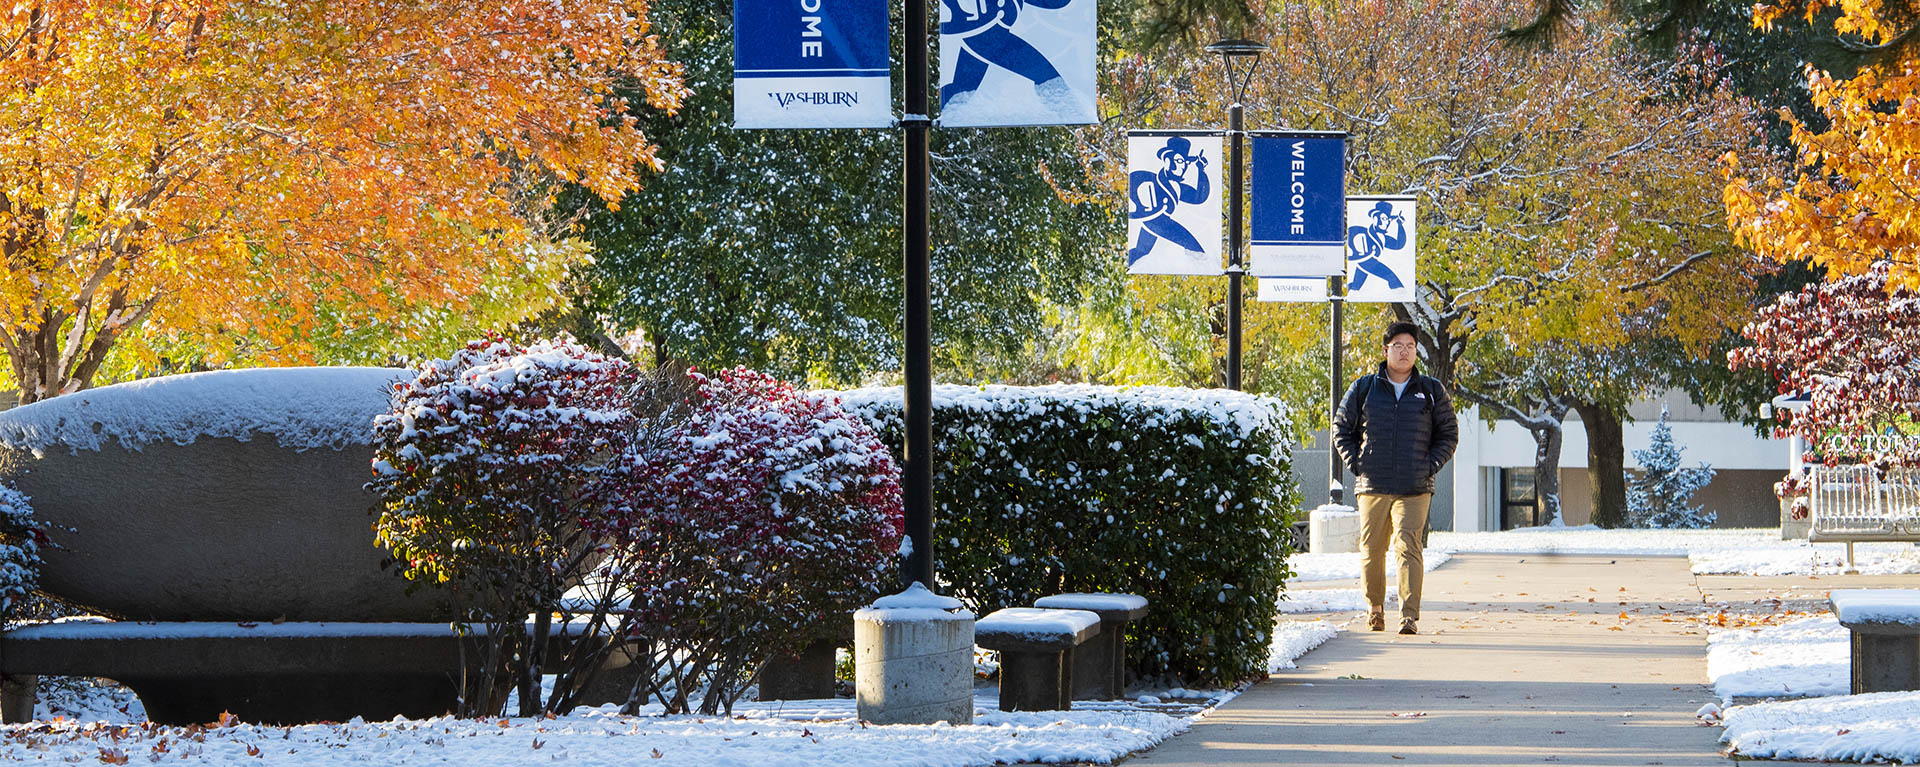 Fall colored trees glow in the morning light while snow dusts the ground as a student walks to class on campus.